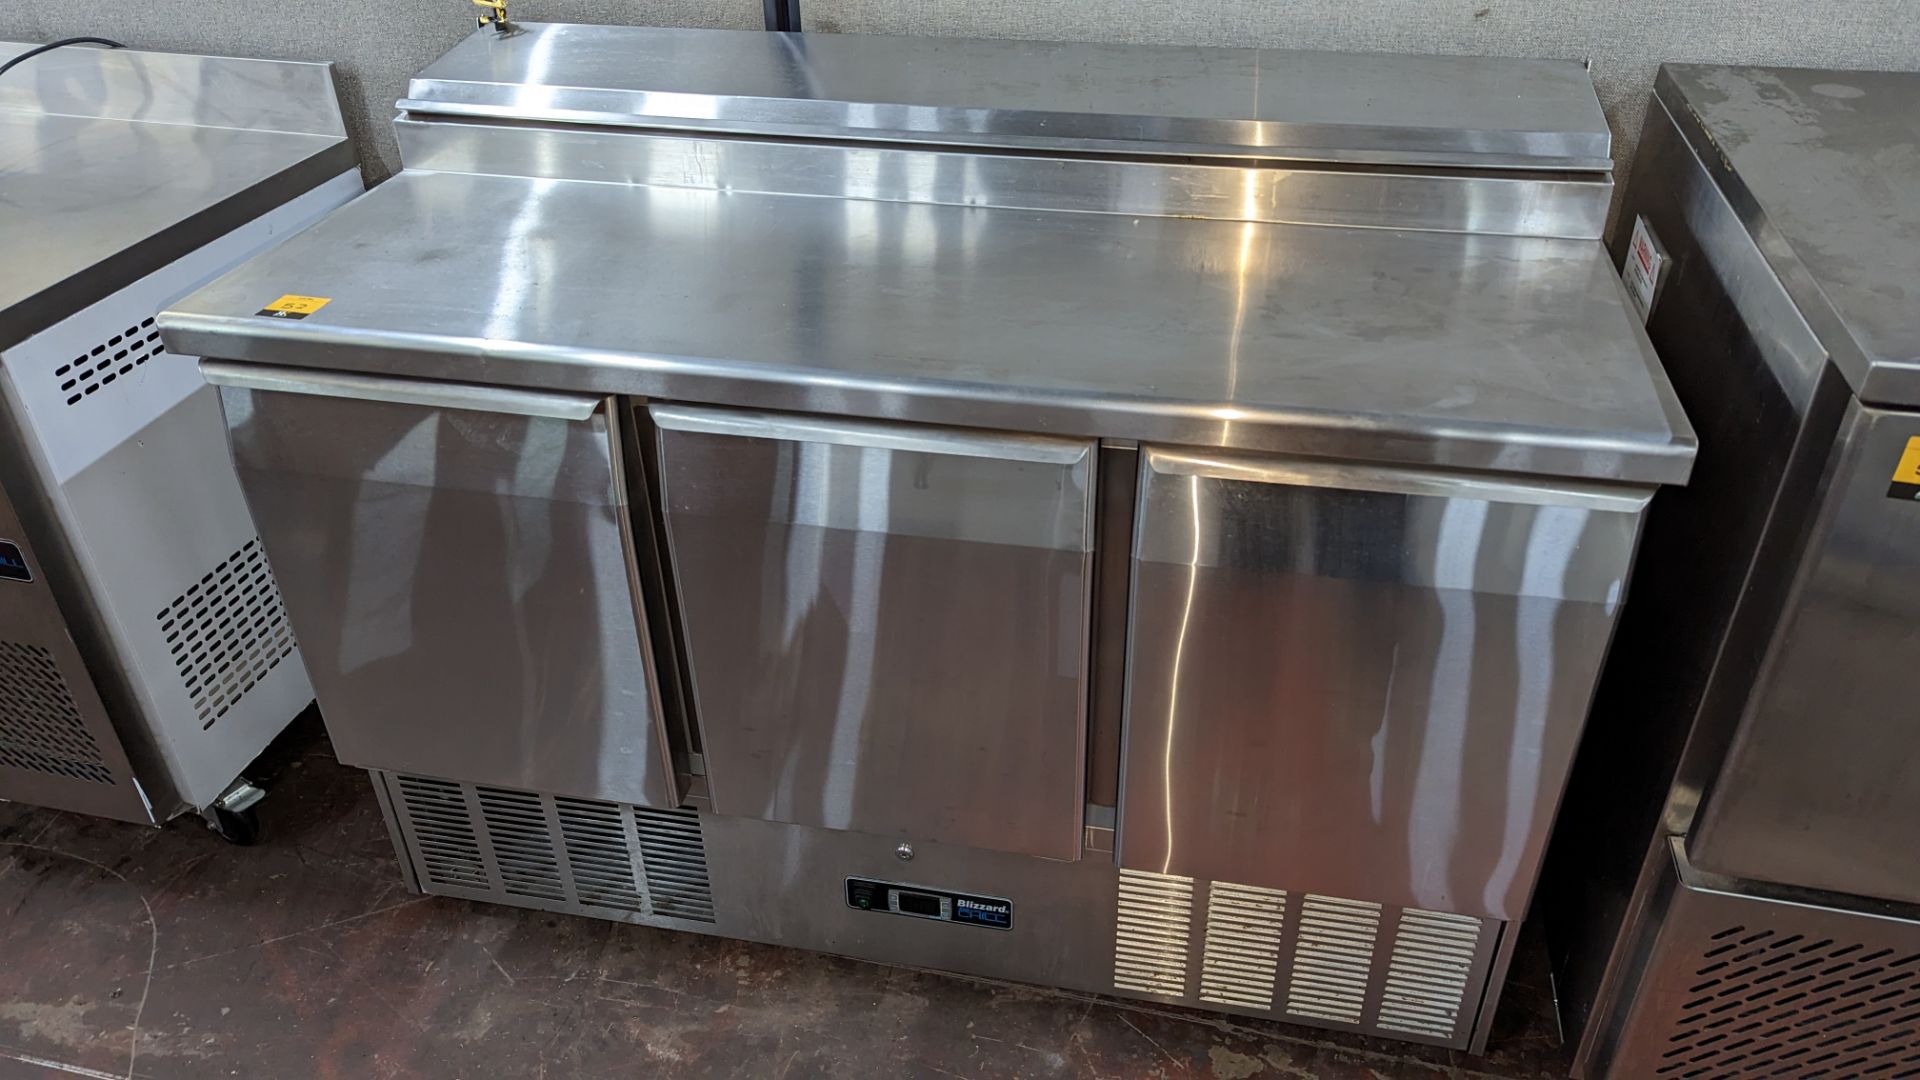 Blizzard stainless steel refrigerated 3 door prep unit with hinged access to saladette unit at rear.